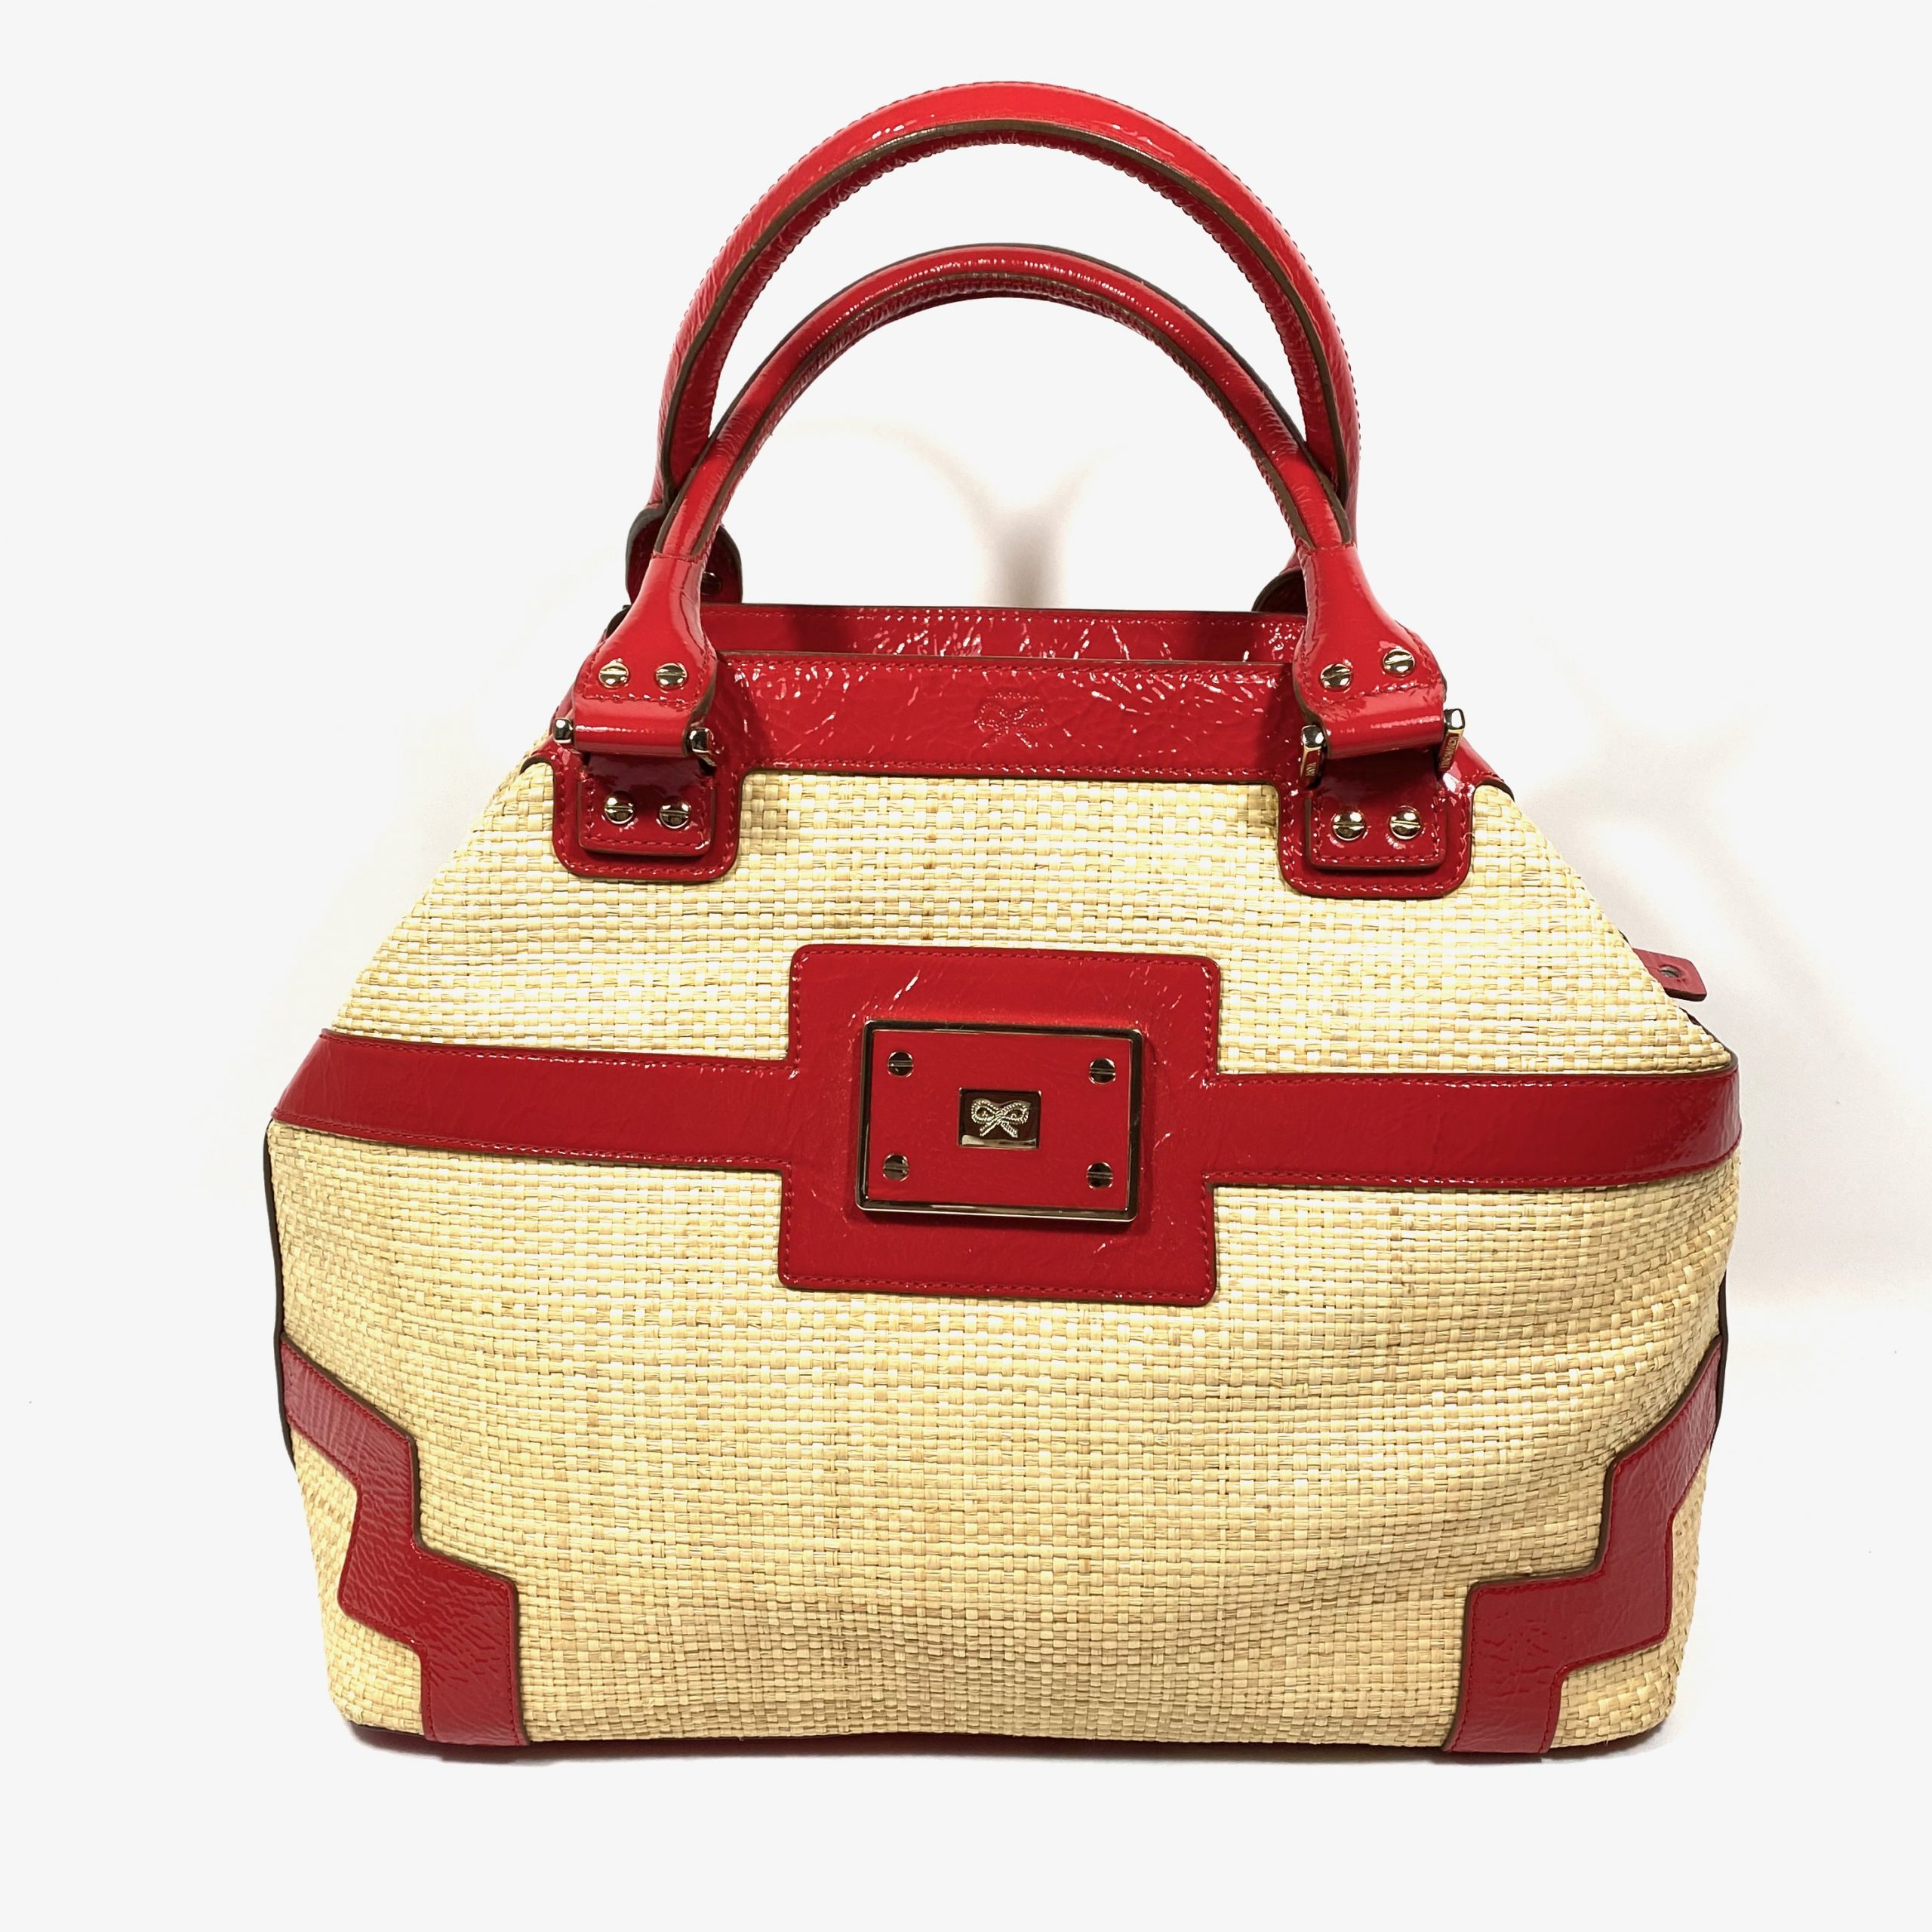 ANYA HINDMARCH BEIGE / RED RAFFIA AND PATENT LEATHER TOTE BAG